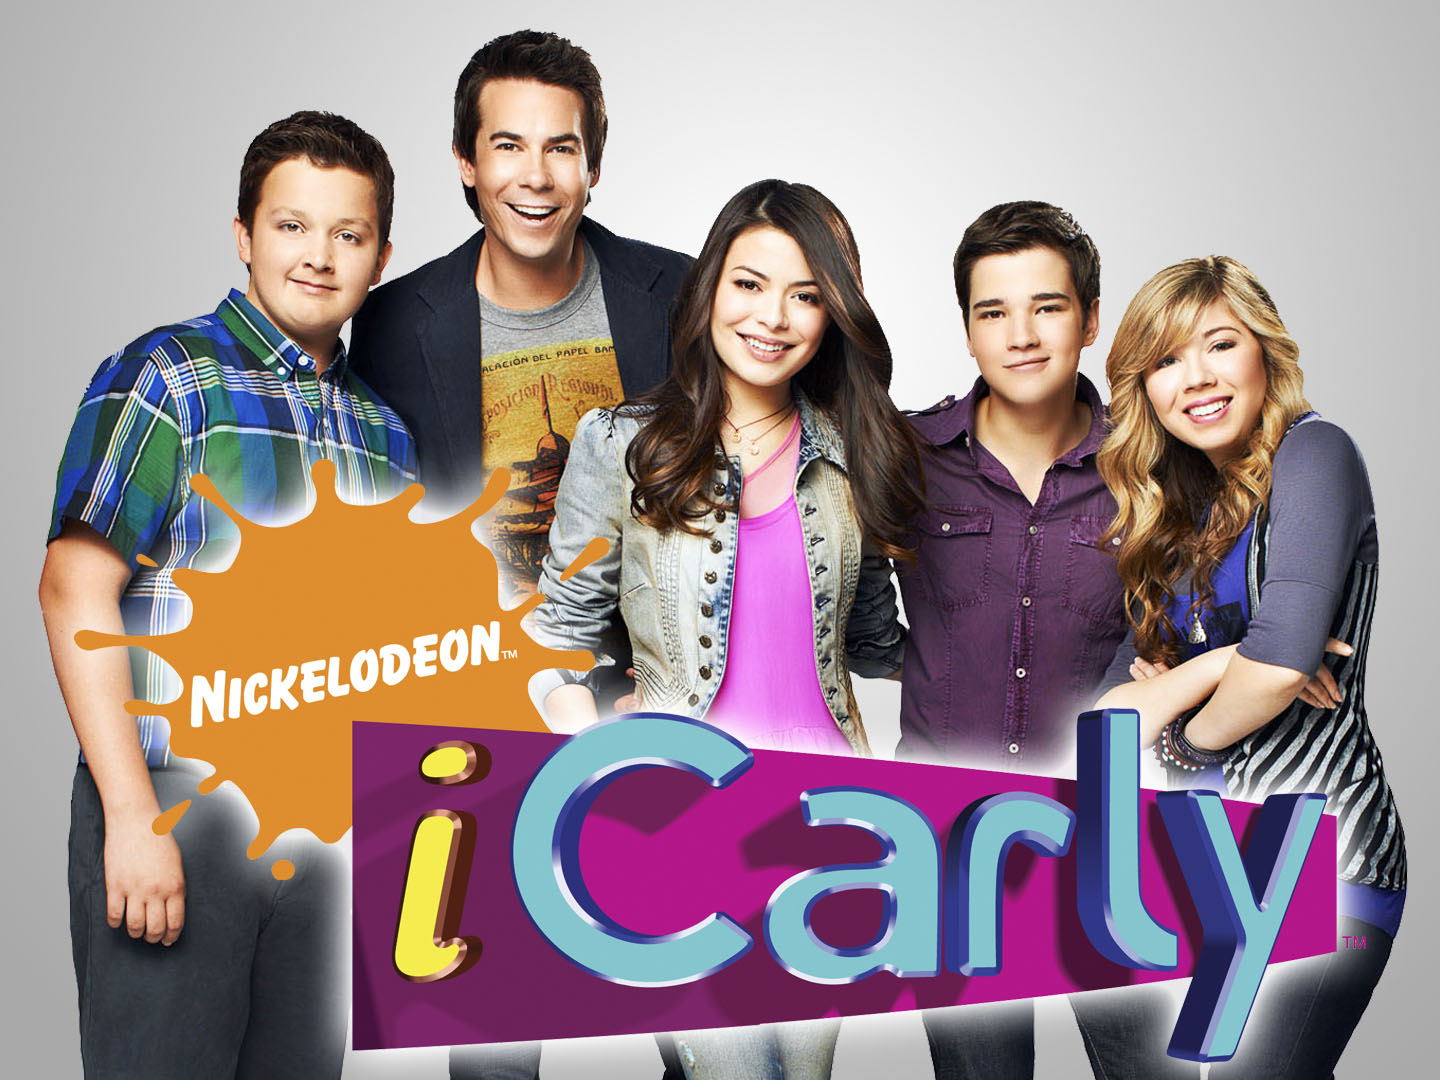 1440x1080 > ICarly Wallpapers